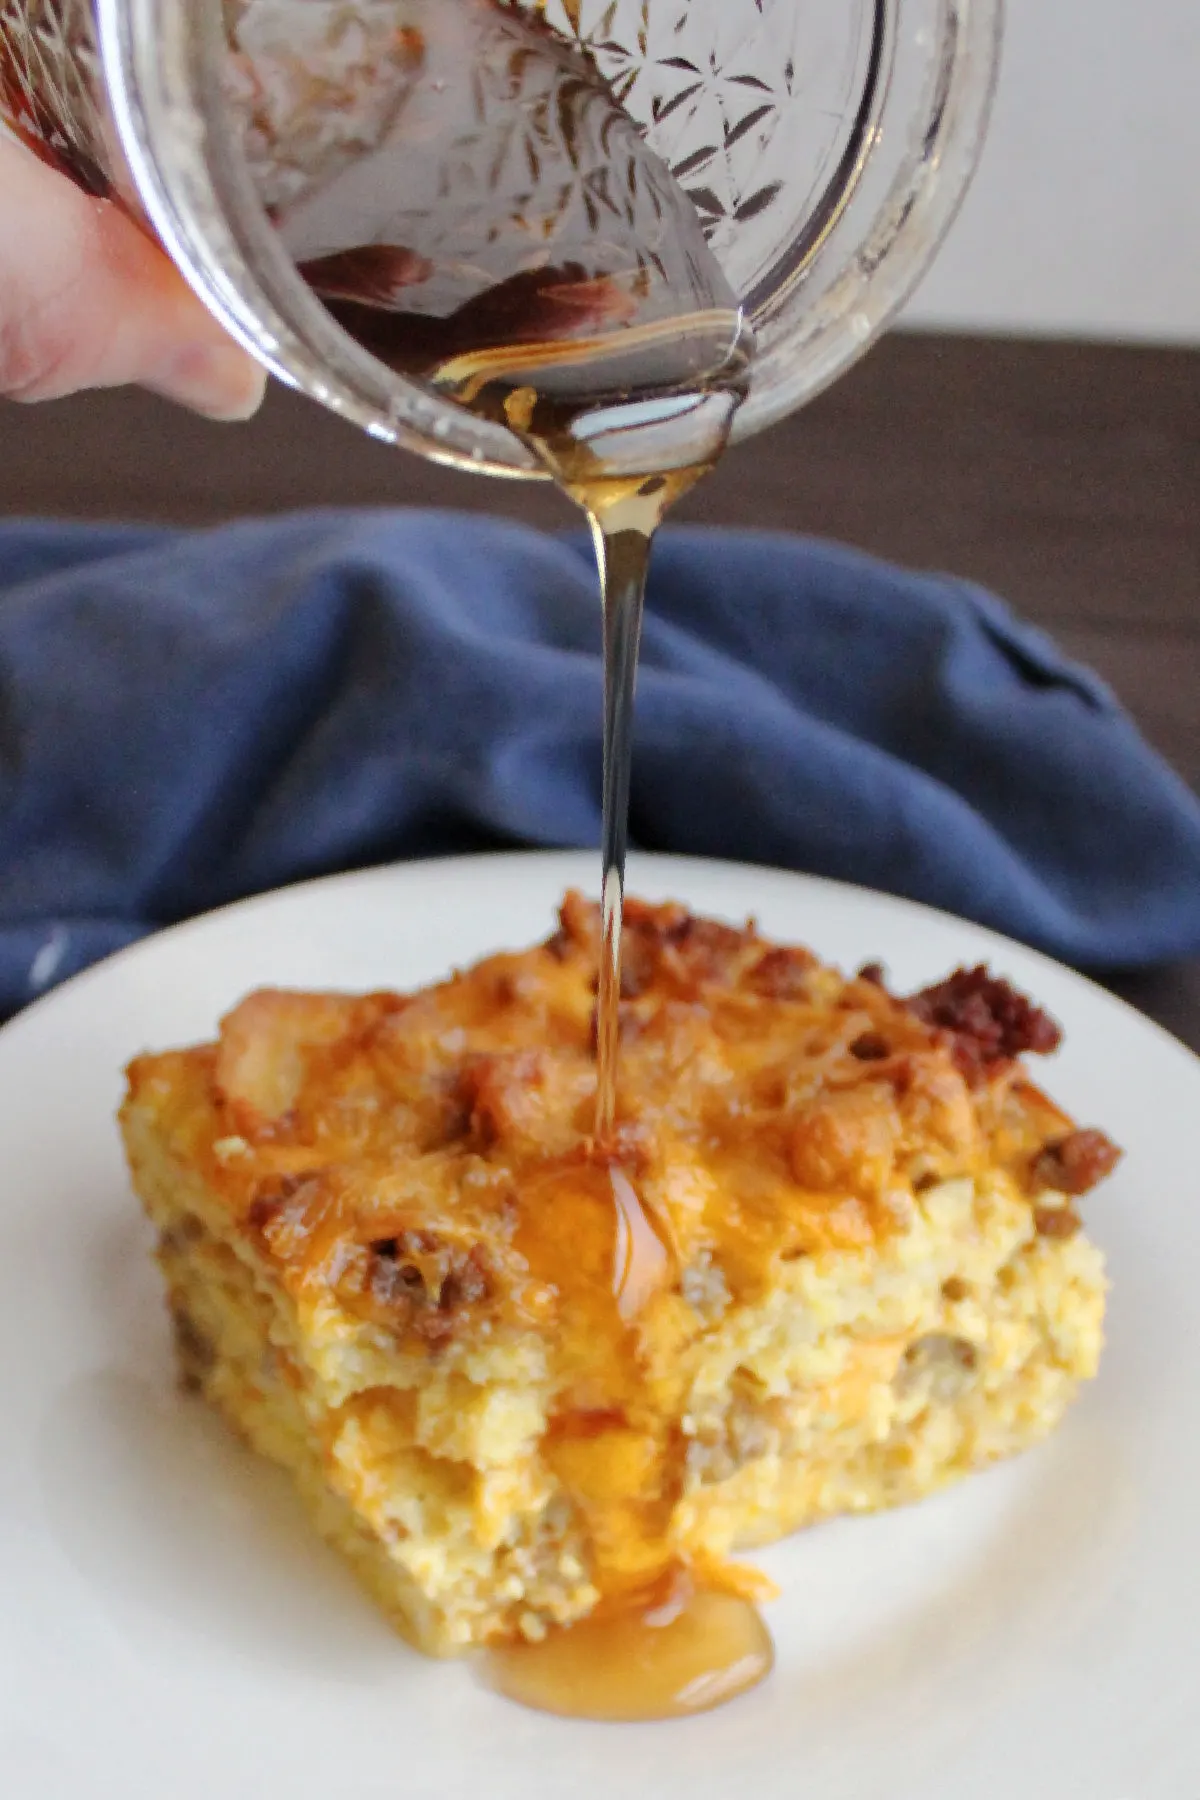 pouring maple syrup over a piece of waffle, egg and sausage casserole.